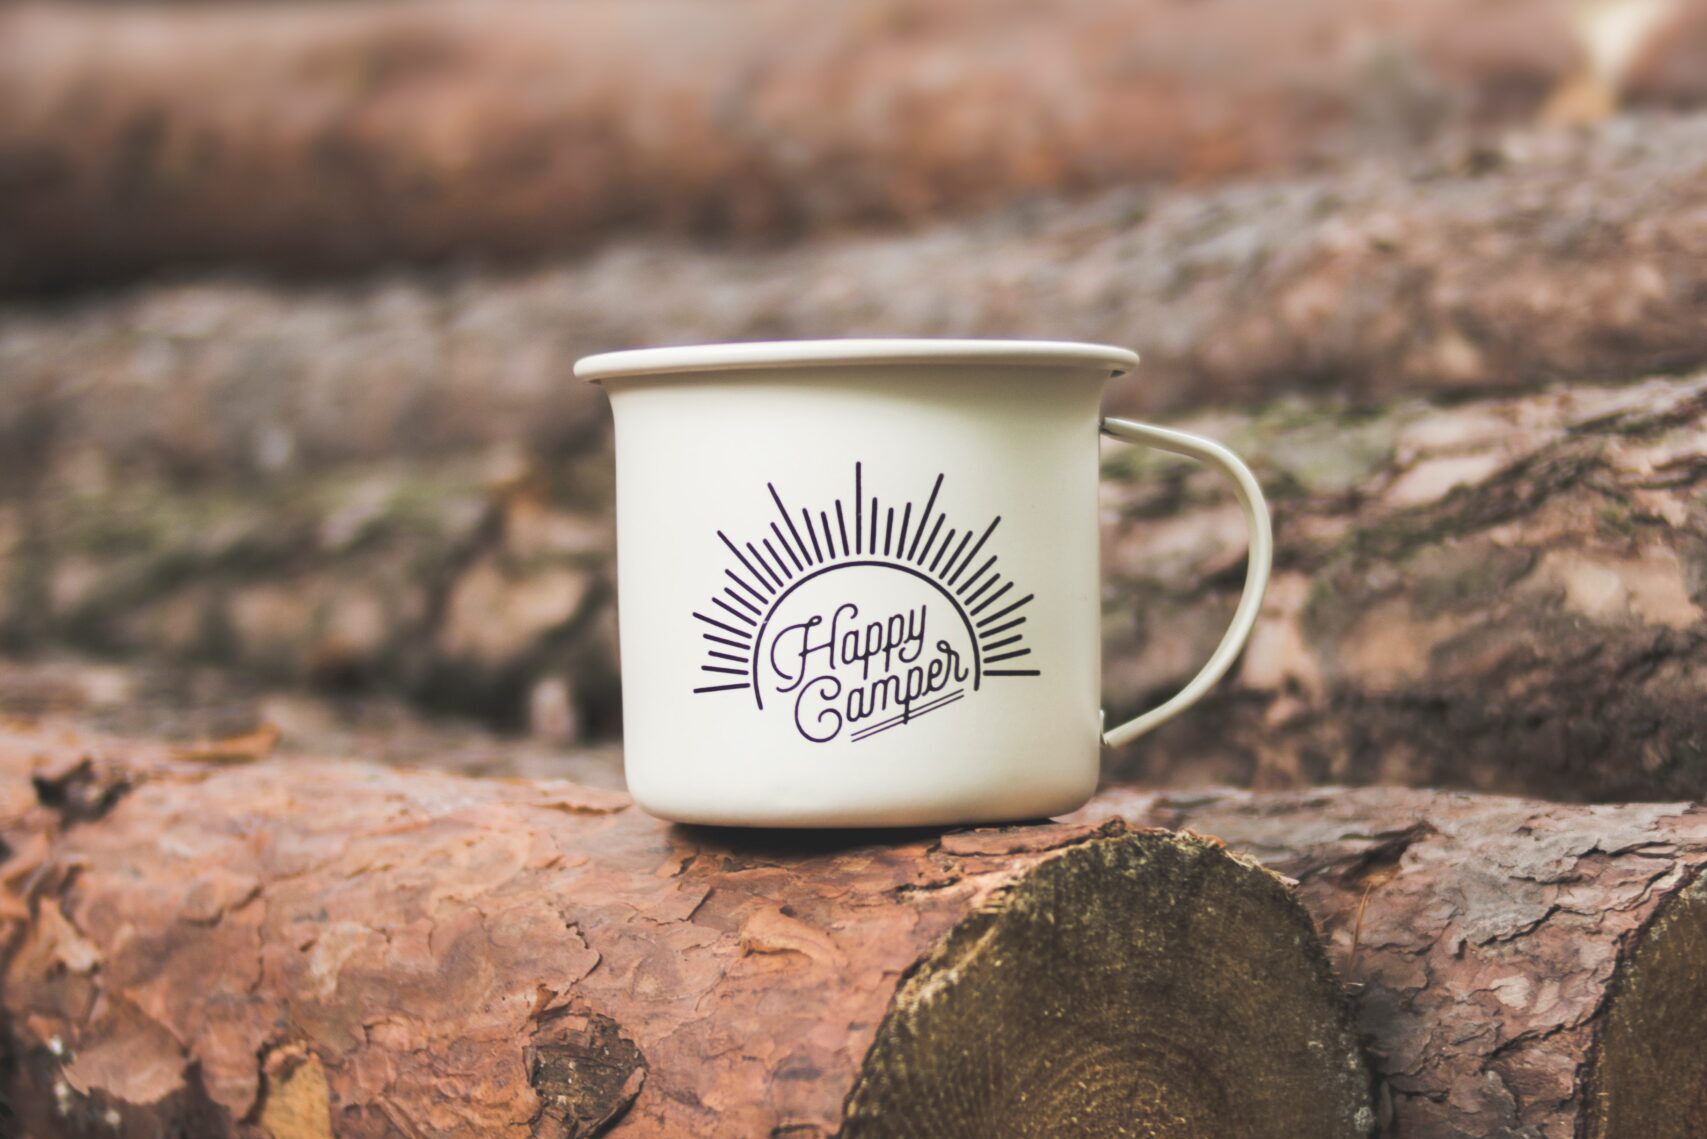 White tin cup sitting on alog in the woods with the words "Happy Camper" printed in black text on it